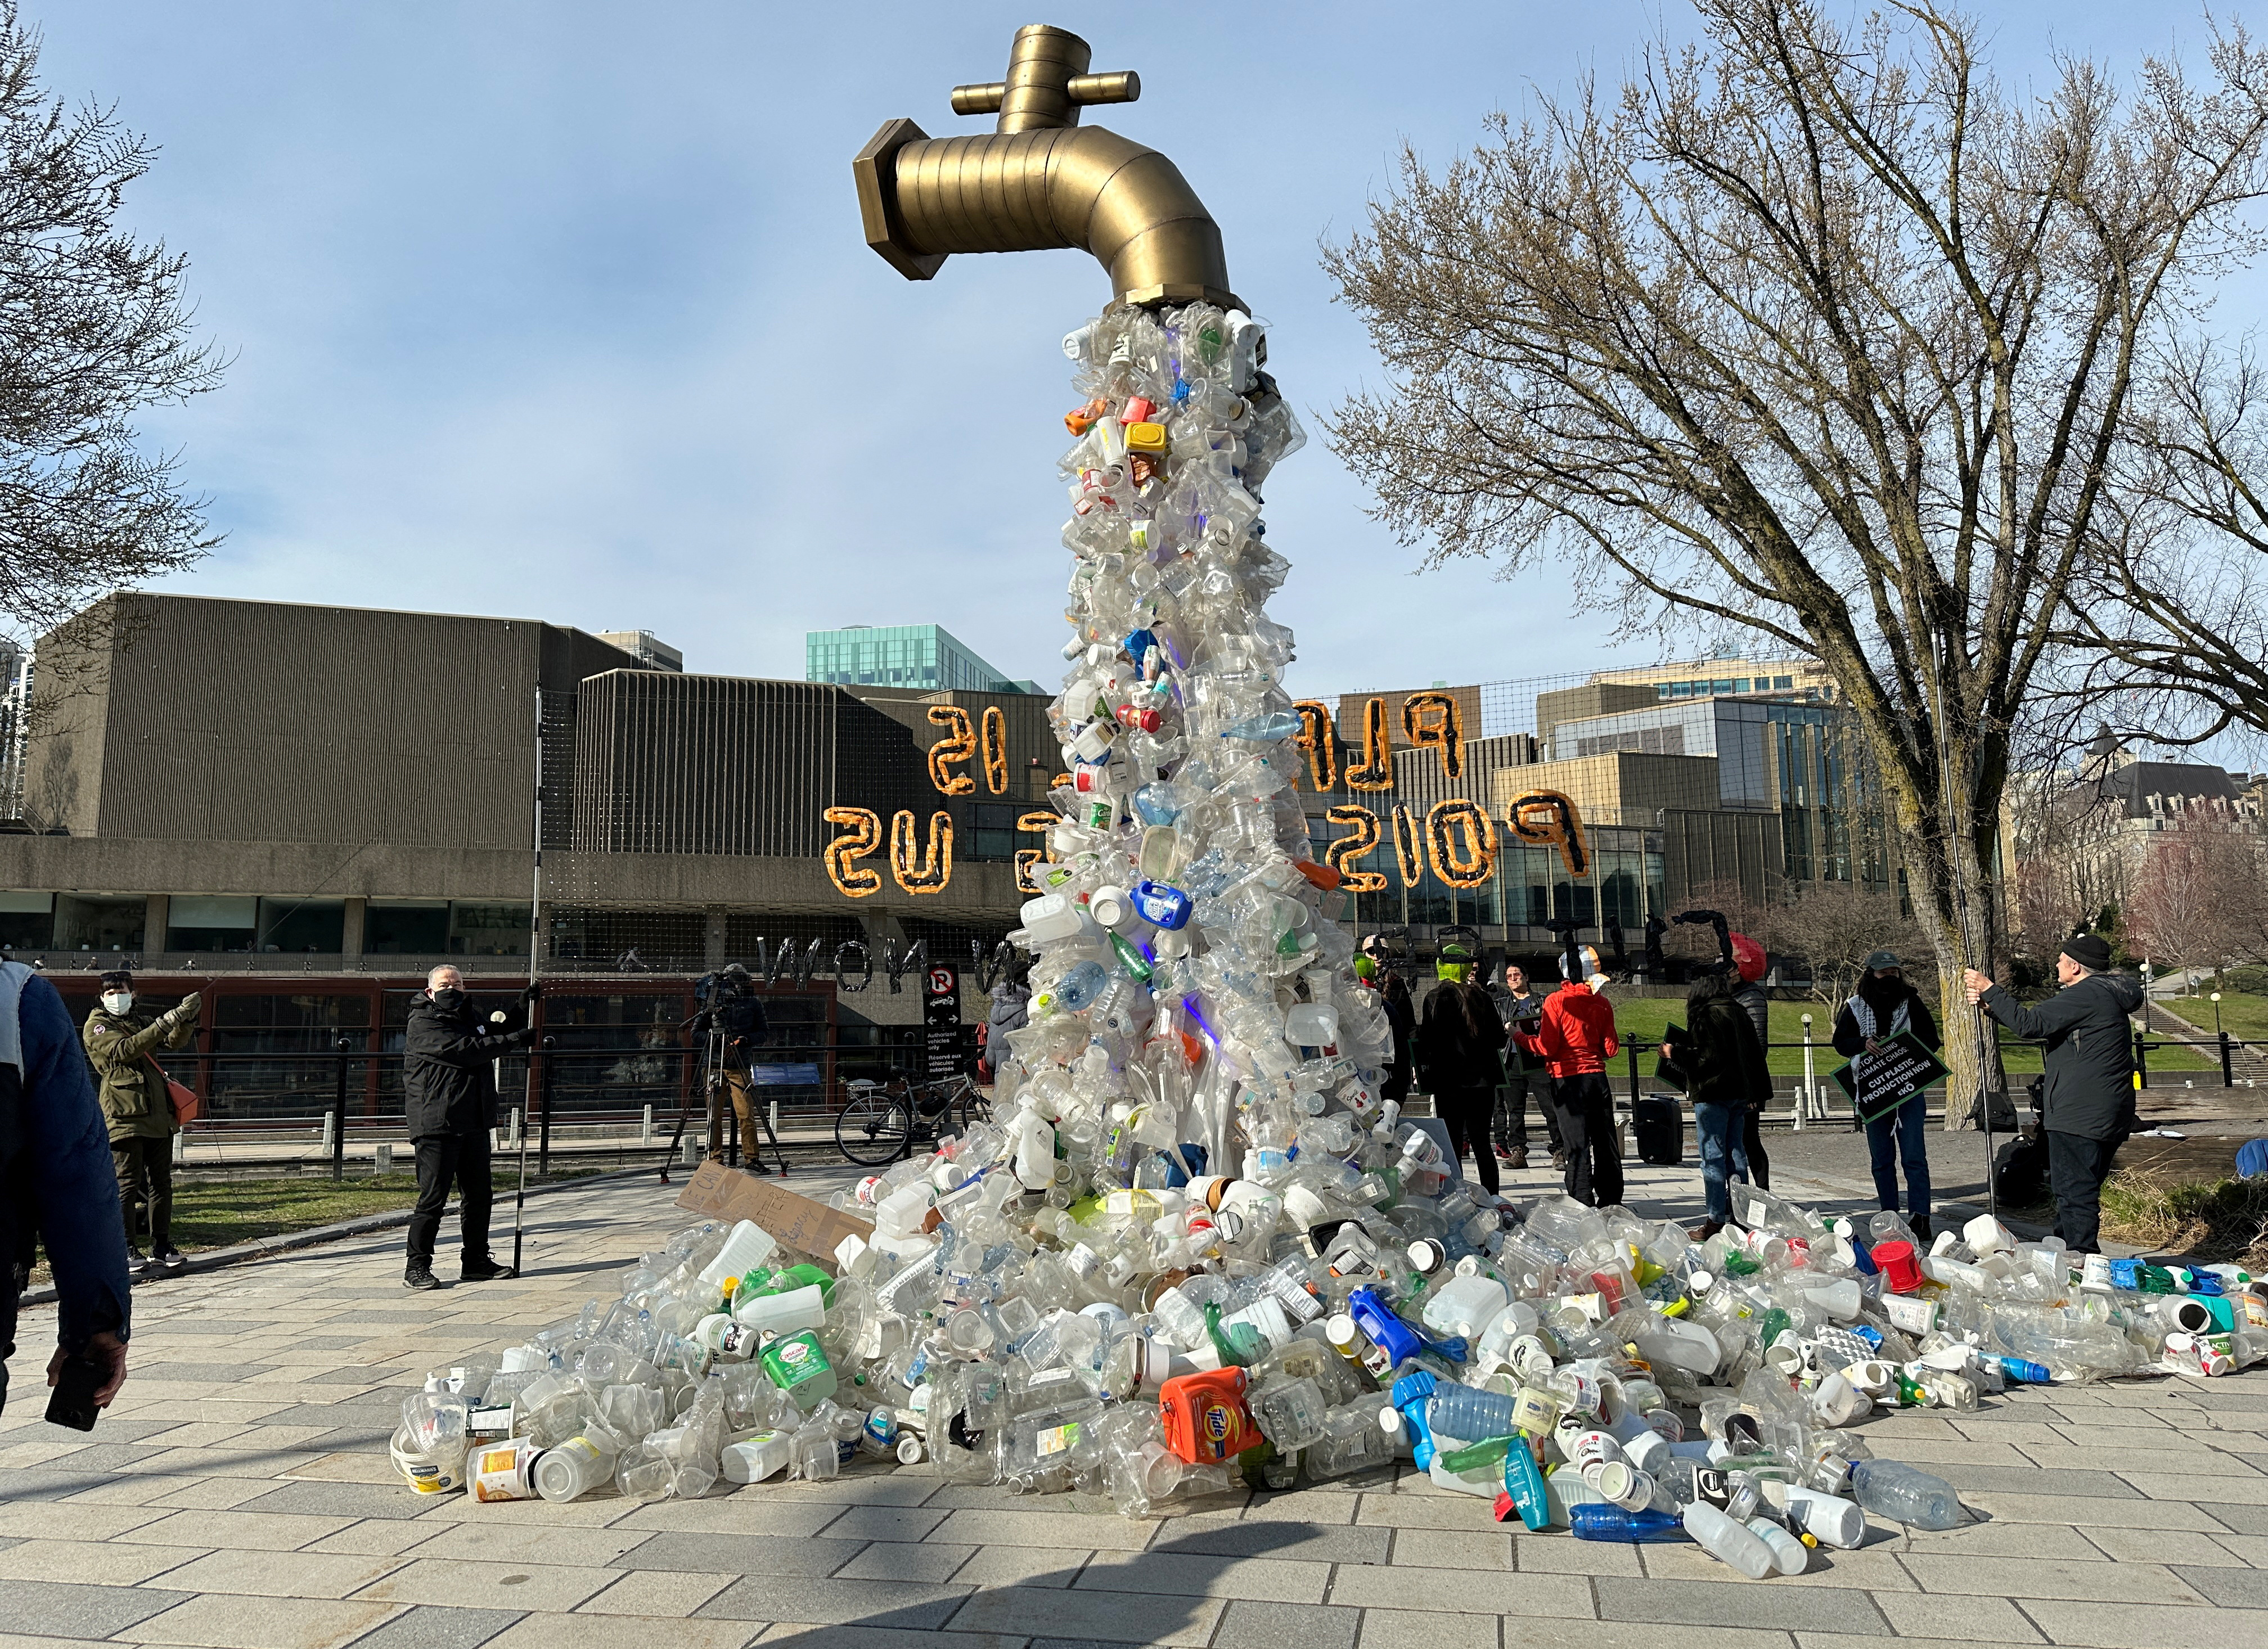 Prop depicting a water tap with plastic bottle pollution is displayed by activists in Ottawa